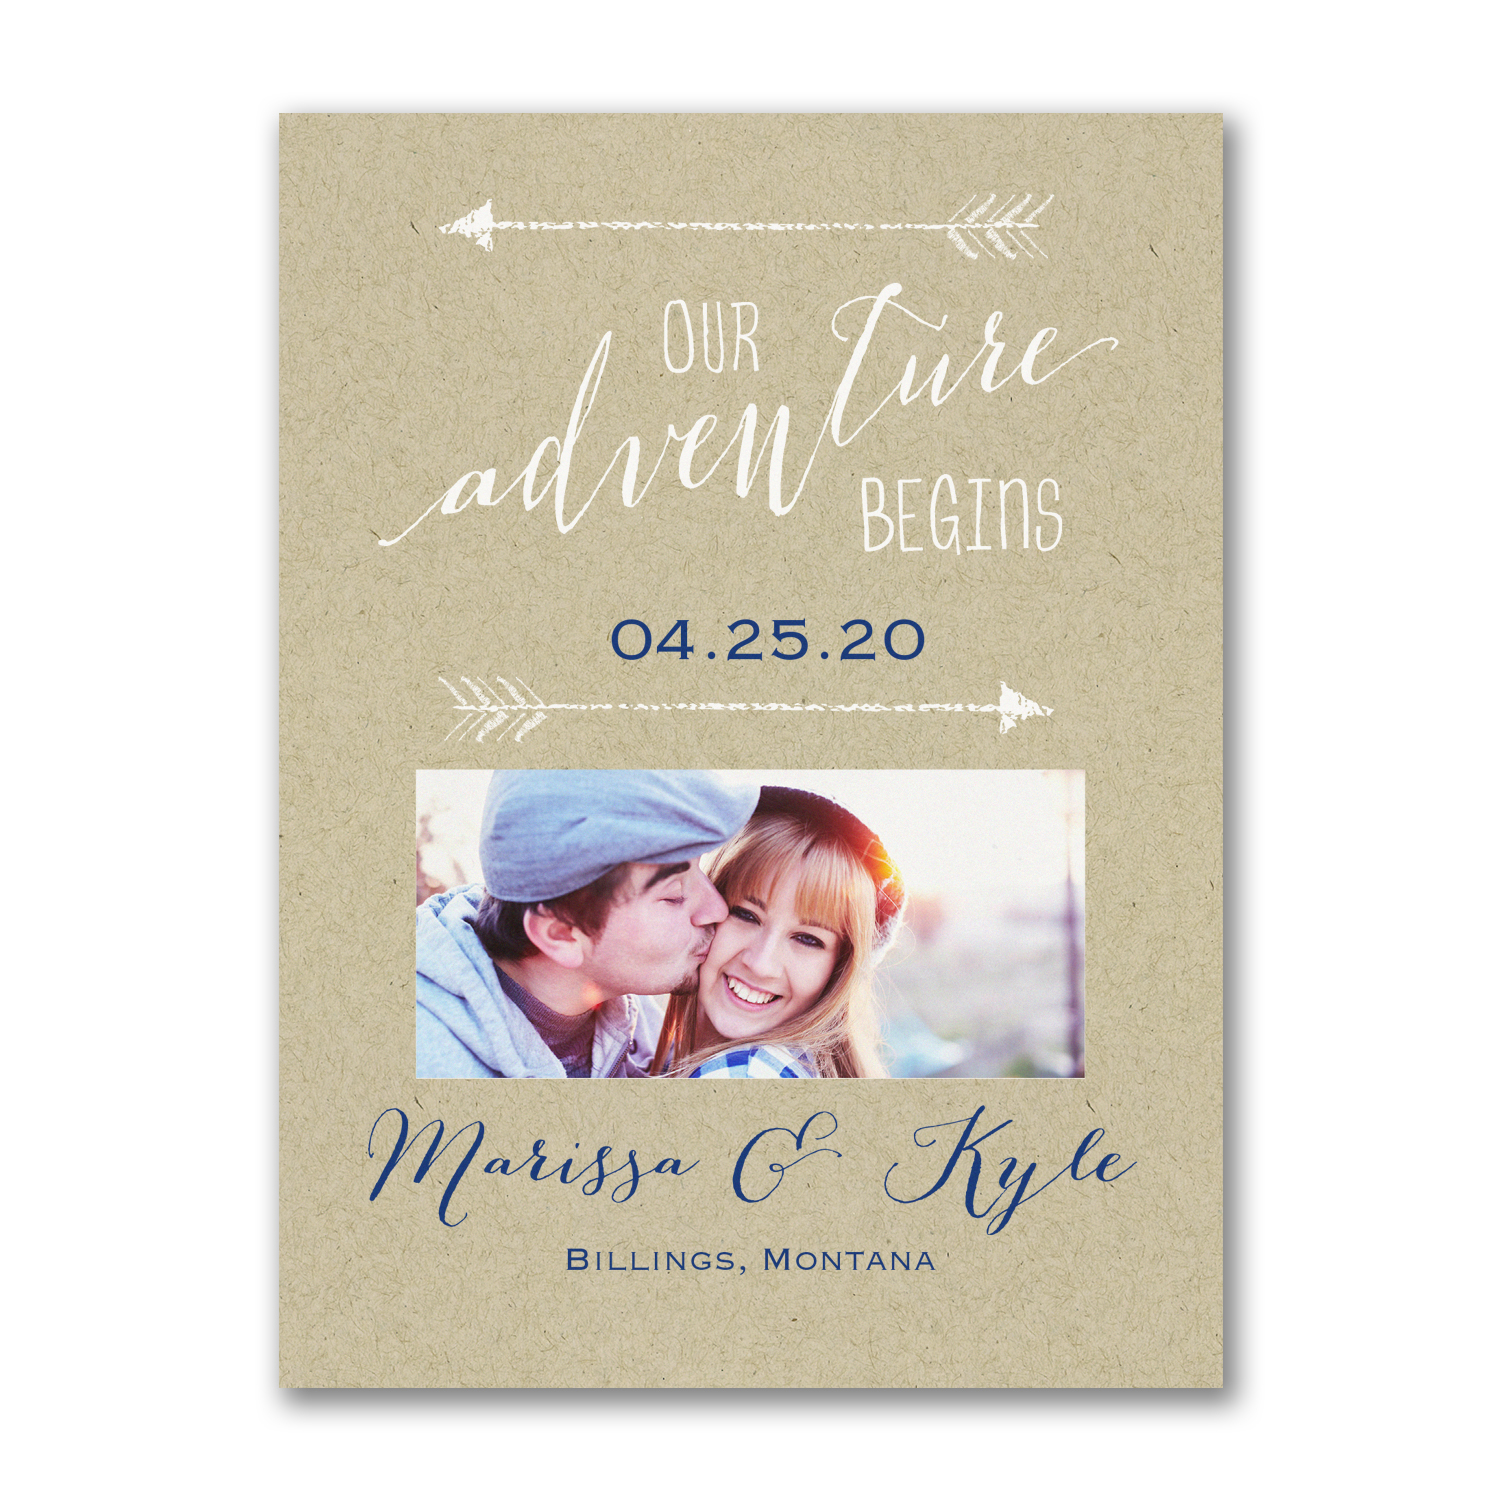 our adventure begins photo save the date kraft paper save the date